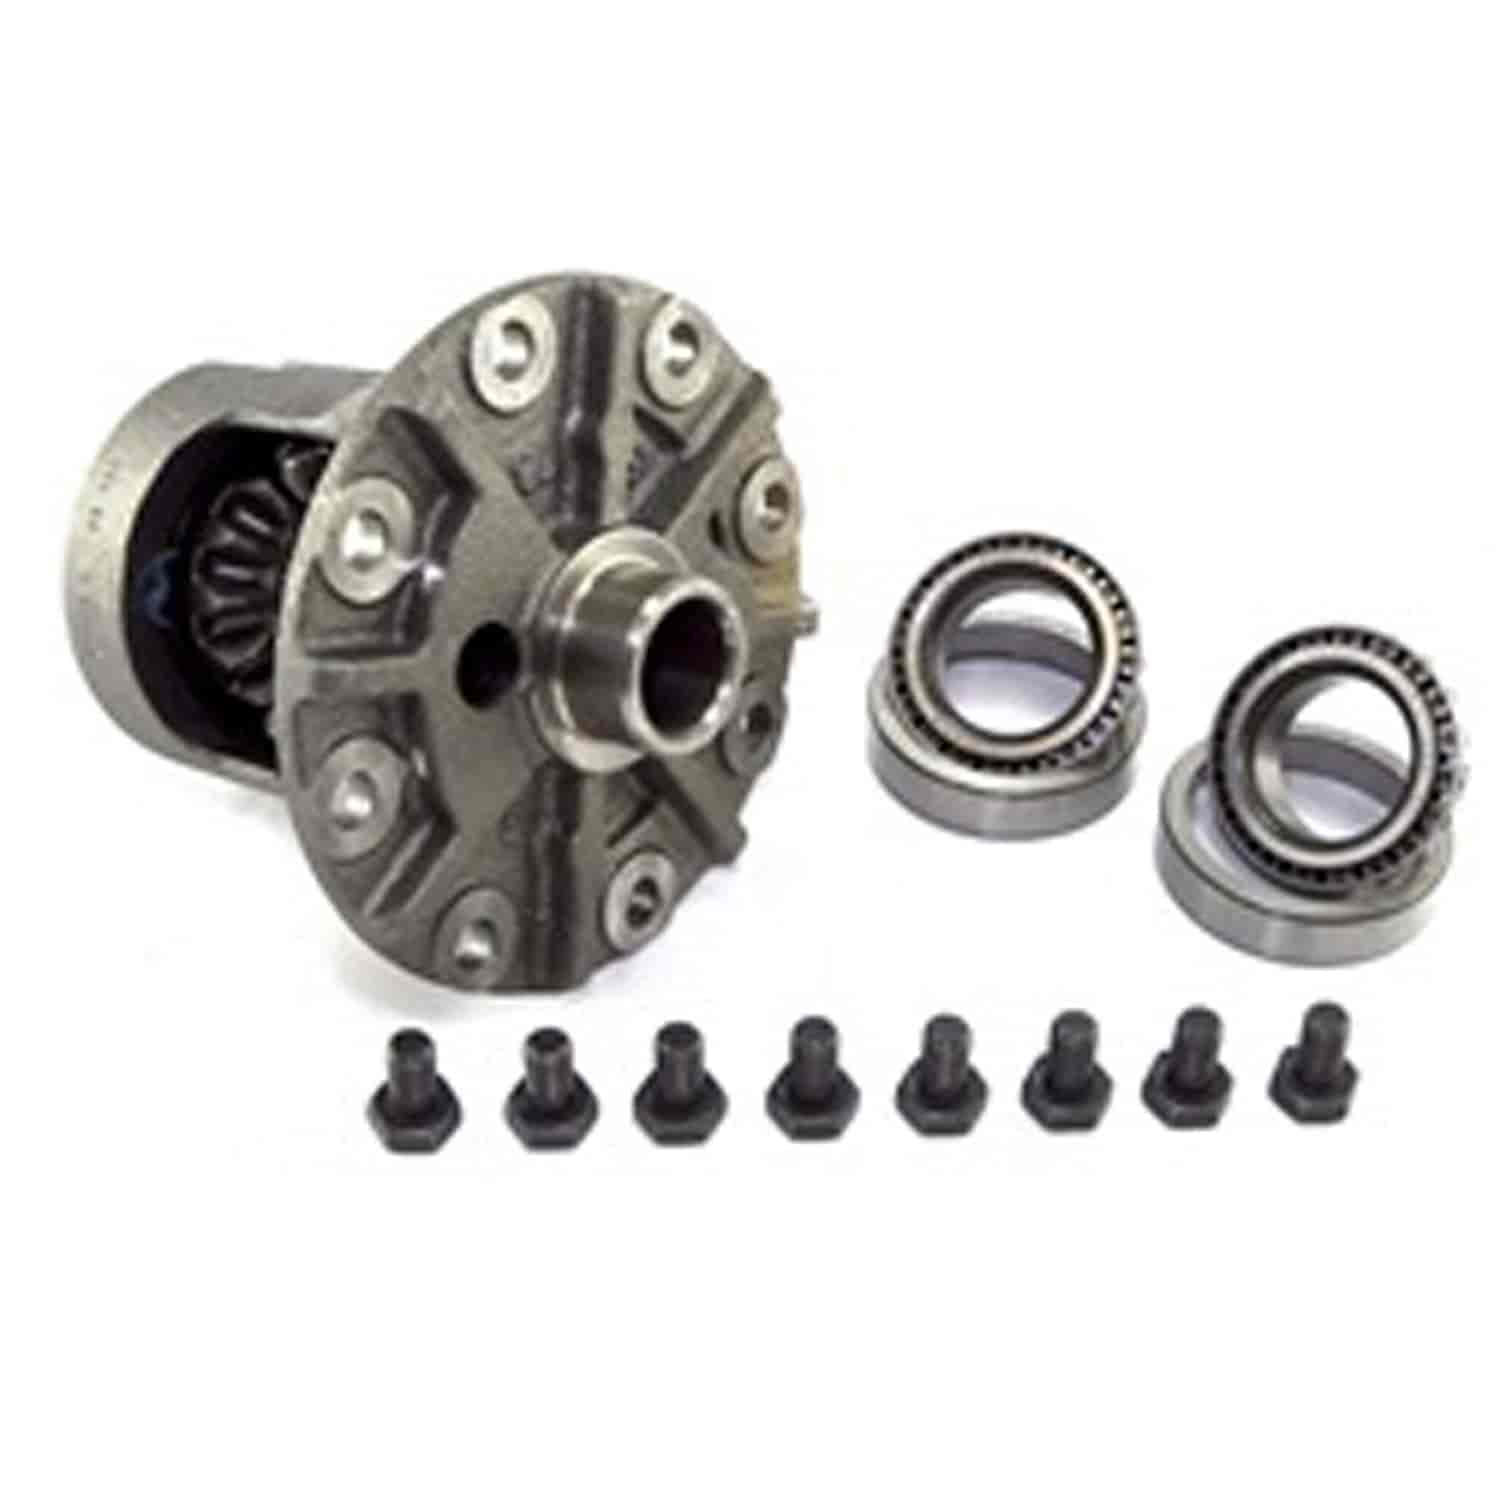 This differential carrier assembly from Omix-ADA fits Jeep Wrangler Cherokees Comanches and Grand Ch